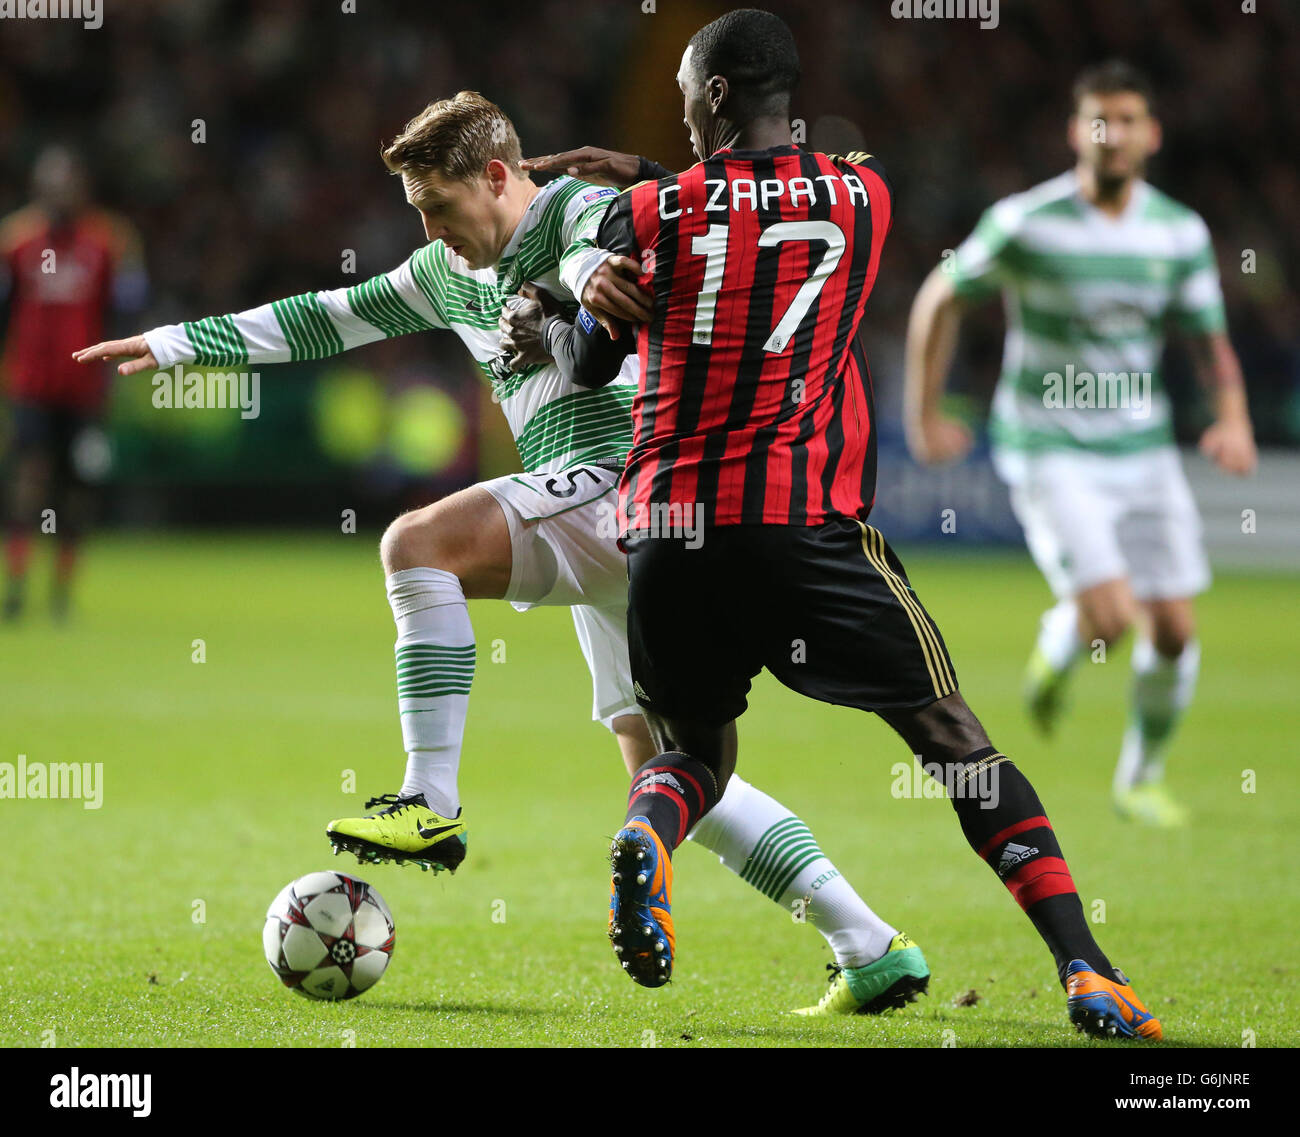 Celtic's Kris Commons challenges AC Milan's Cristian Zapata (right) during the UEFA Champions League match at Celtic Park, Glasgow. Stock Photo